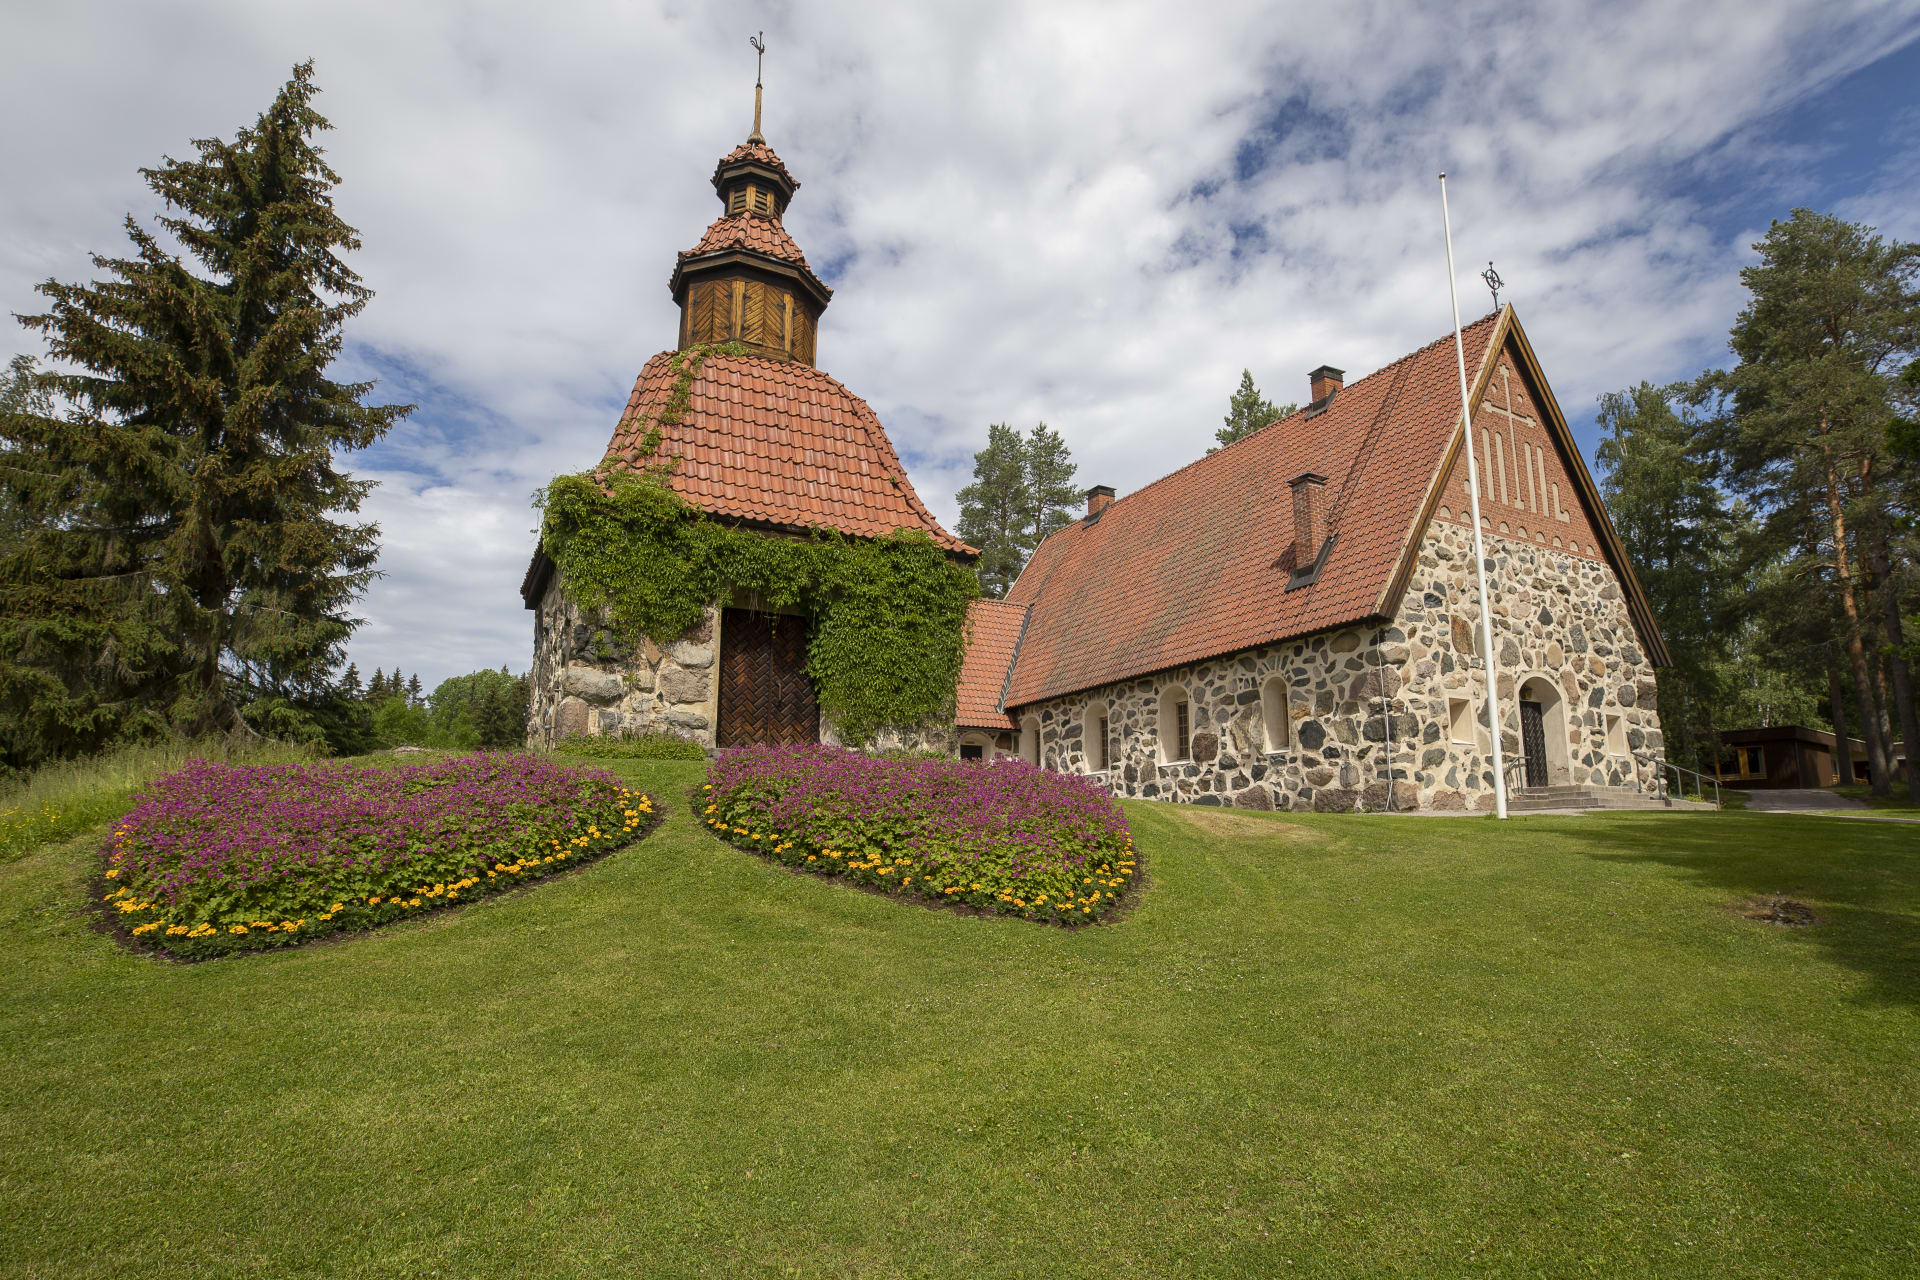 Medieval style church with red tiled roofing.